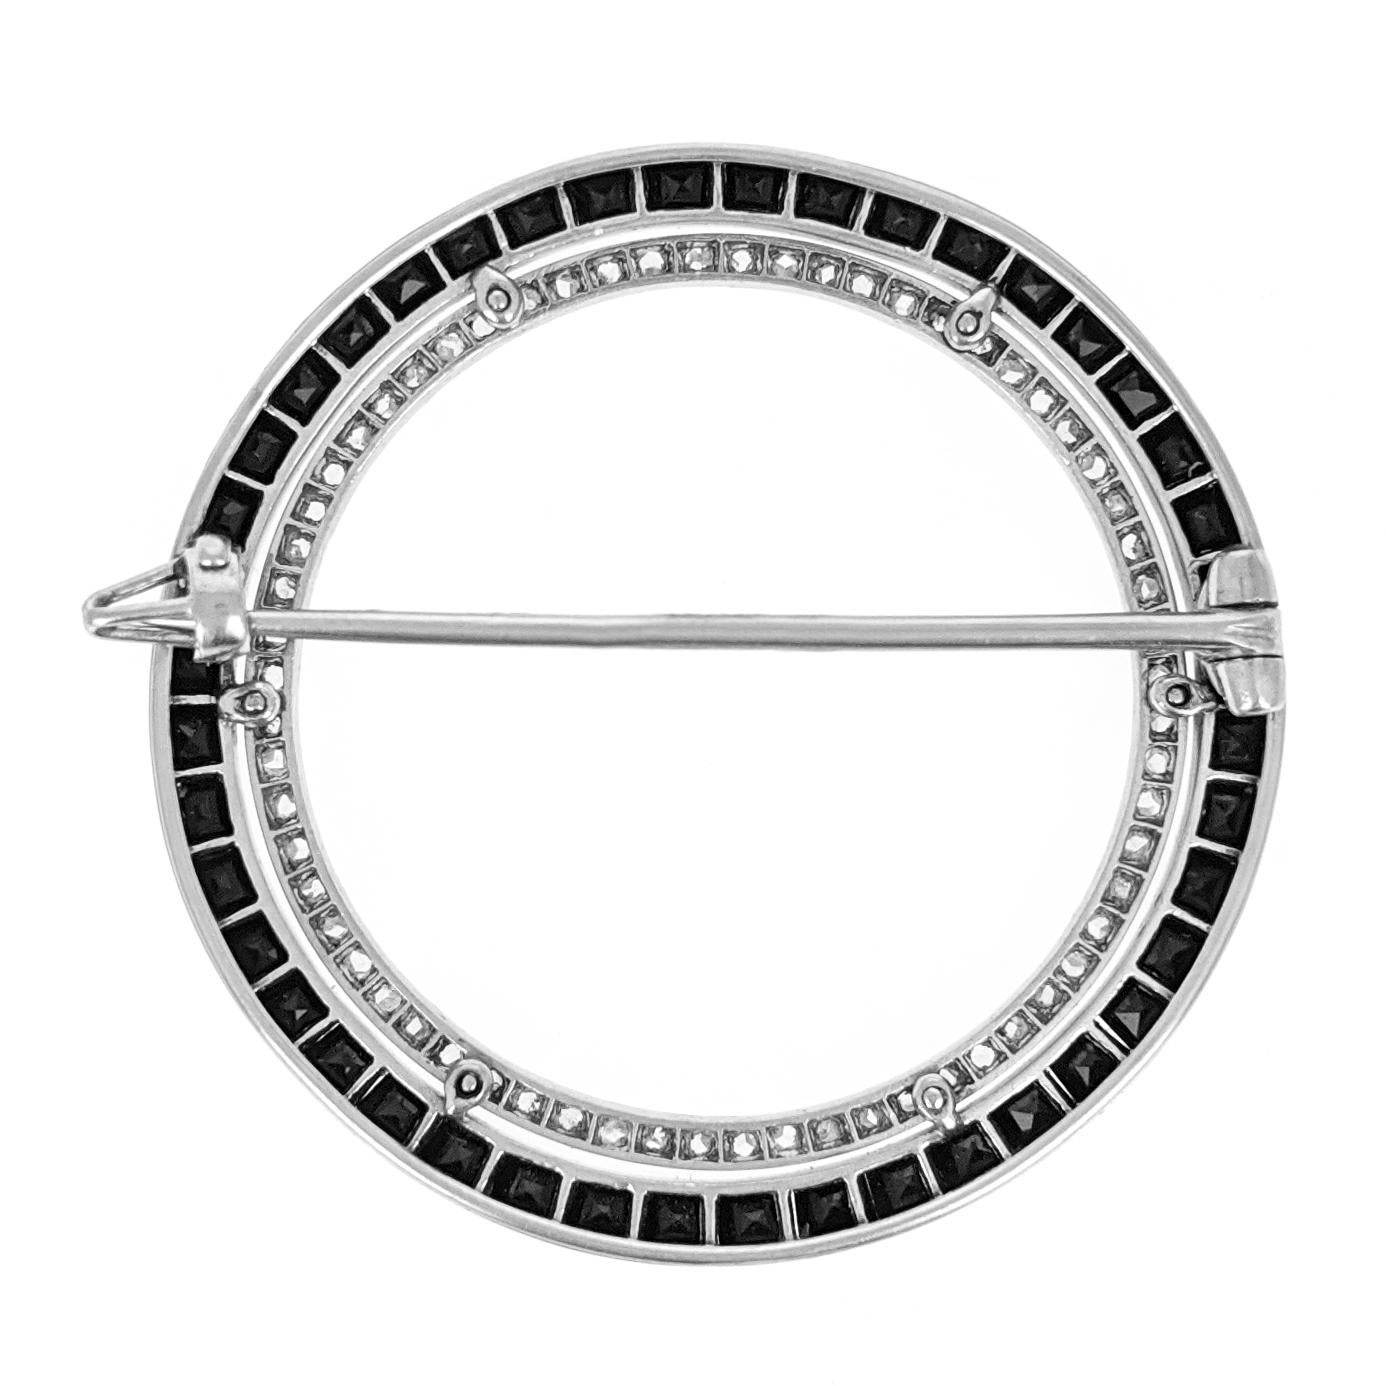 This Art Deco circle brooch by Cartier Paris features a row of rose cut diamonds further encircled by a row of calibre cut onyx. It is expertly crafted in platinum with milgrain detailing. Signed and numbered. Measures approximately 1.38 inches in